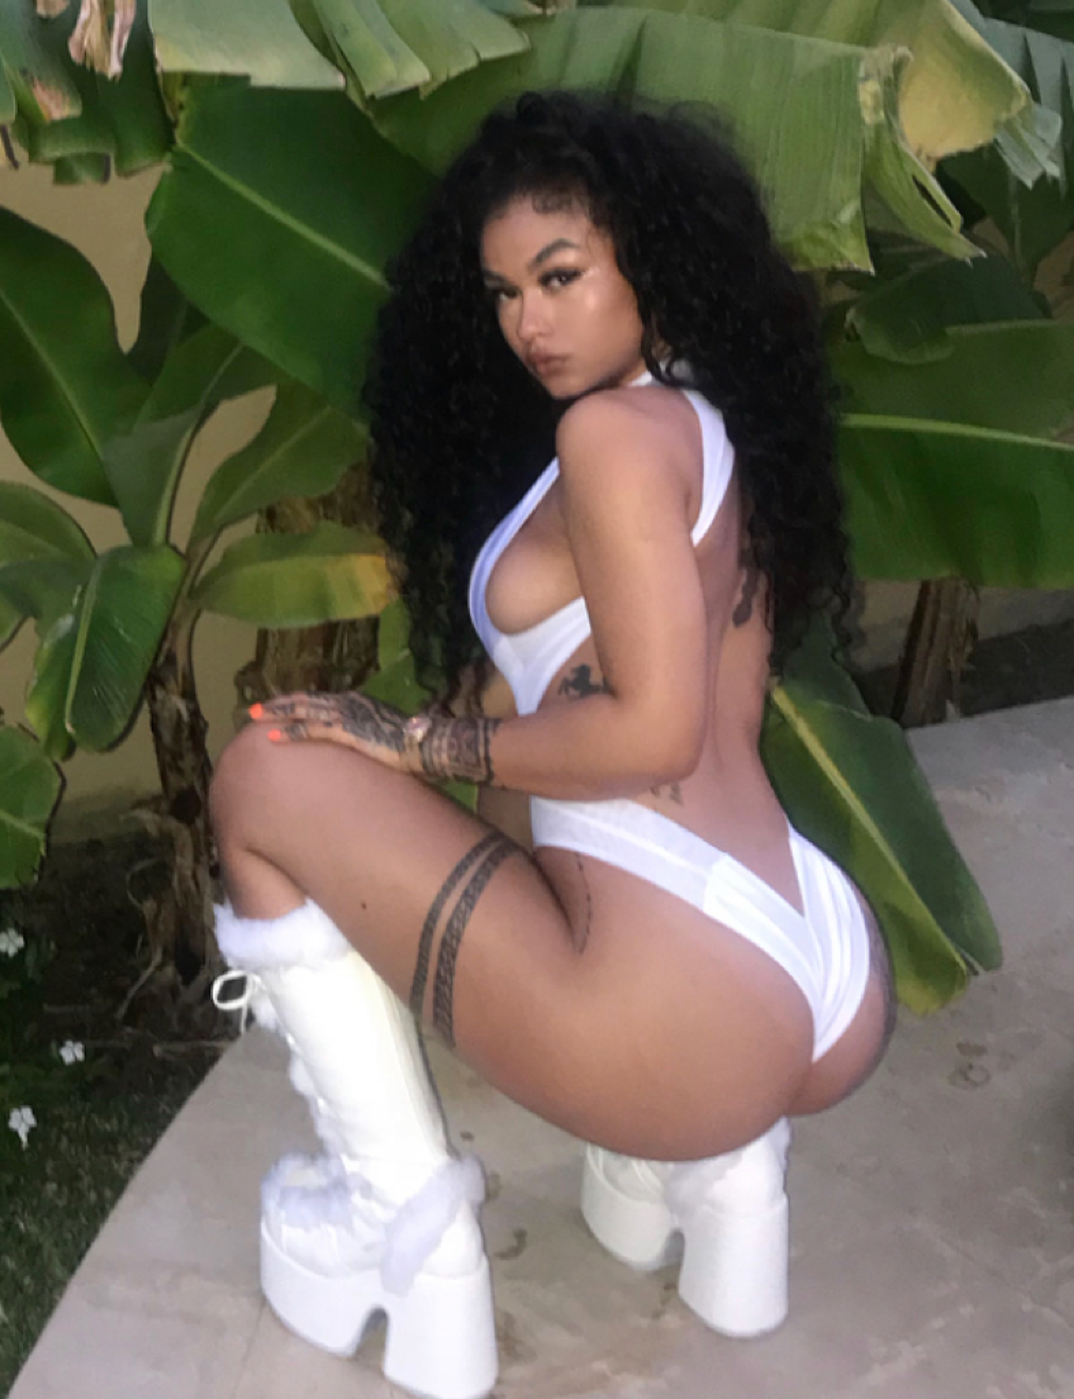 India Love Sexiest Pictures.